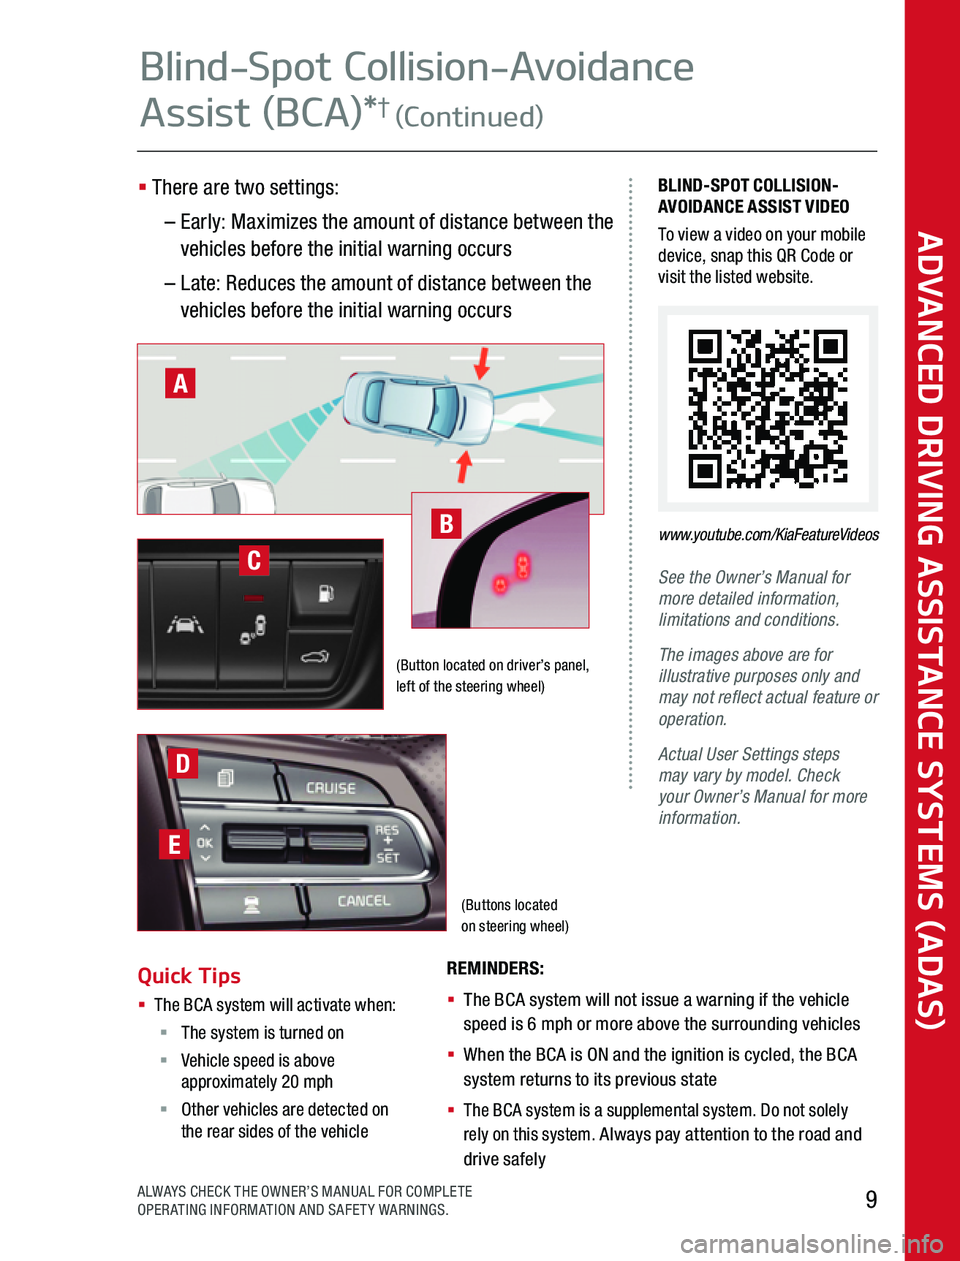 KIA NIRO PHEV 2020  Advanced Driving Assistance System (Buttons located  on steering wheel)
BLIND-SPOT COLLISION-AVOIDANCE ASSIST VIDEOTo view a video on your mobile device, snap this QR Code or visit the listed website  
See the Owner’s Manual for more